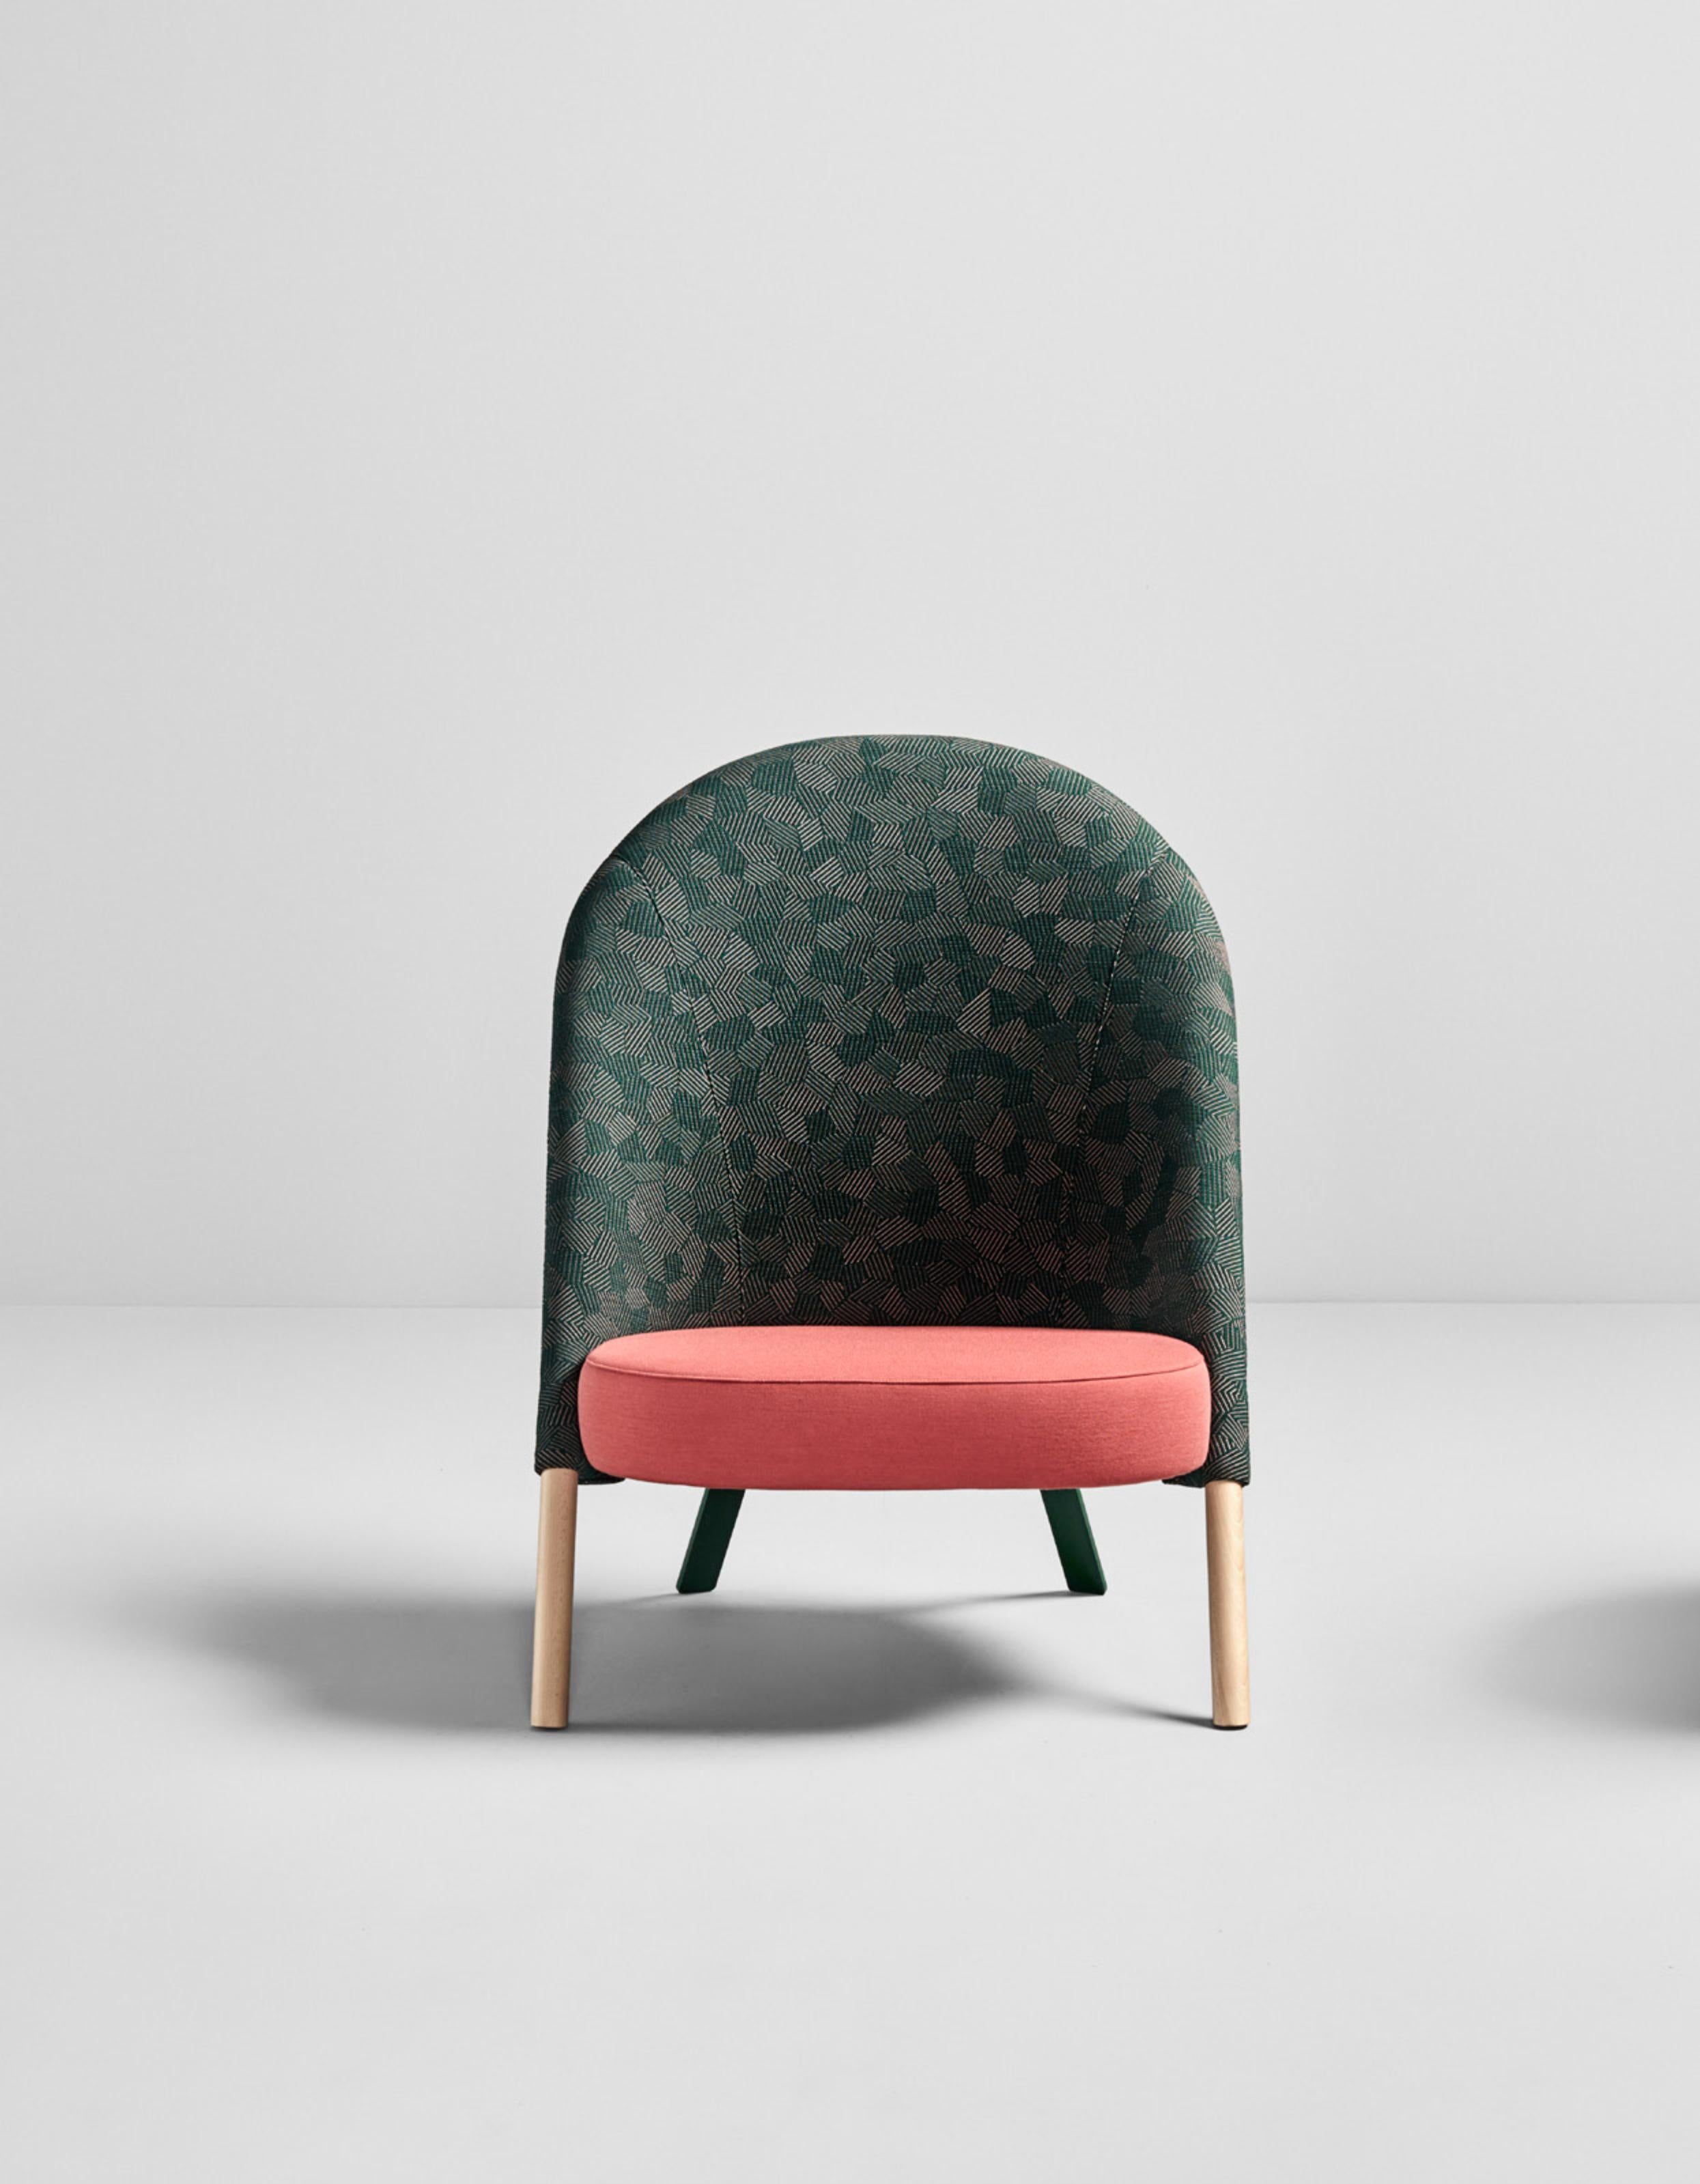 Okapi Armchair by Pepe Albargues
Dimensions: Width 76 - Depth 74 - Height 102 - Seat 40 cm
Materials: Iron structure with plywood and tablex.
Foam CMHR (high resilience and flame retardant) for all our cushion filling systems.
Lacquered beech wood